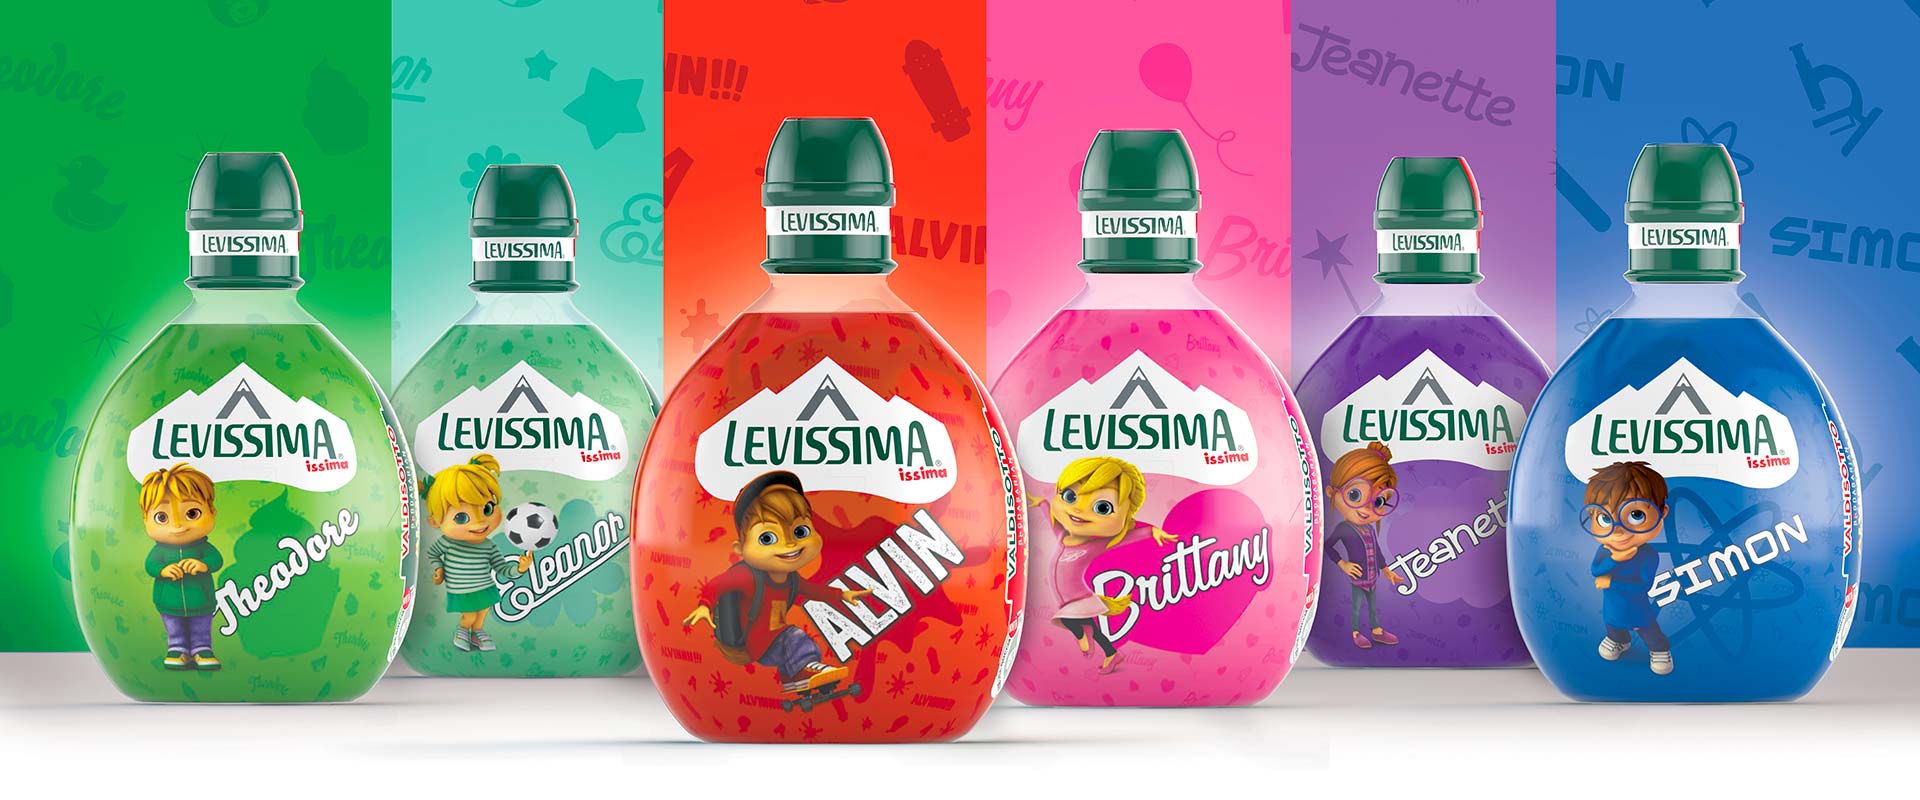 Levissima Issima special edition with Alvin Superstar licensing